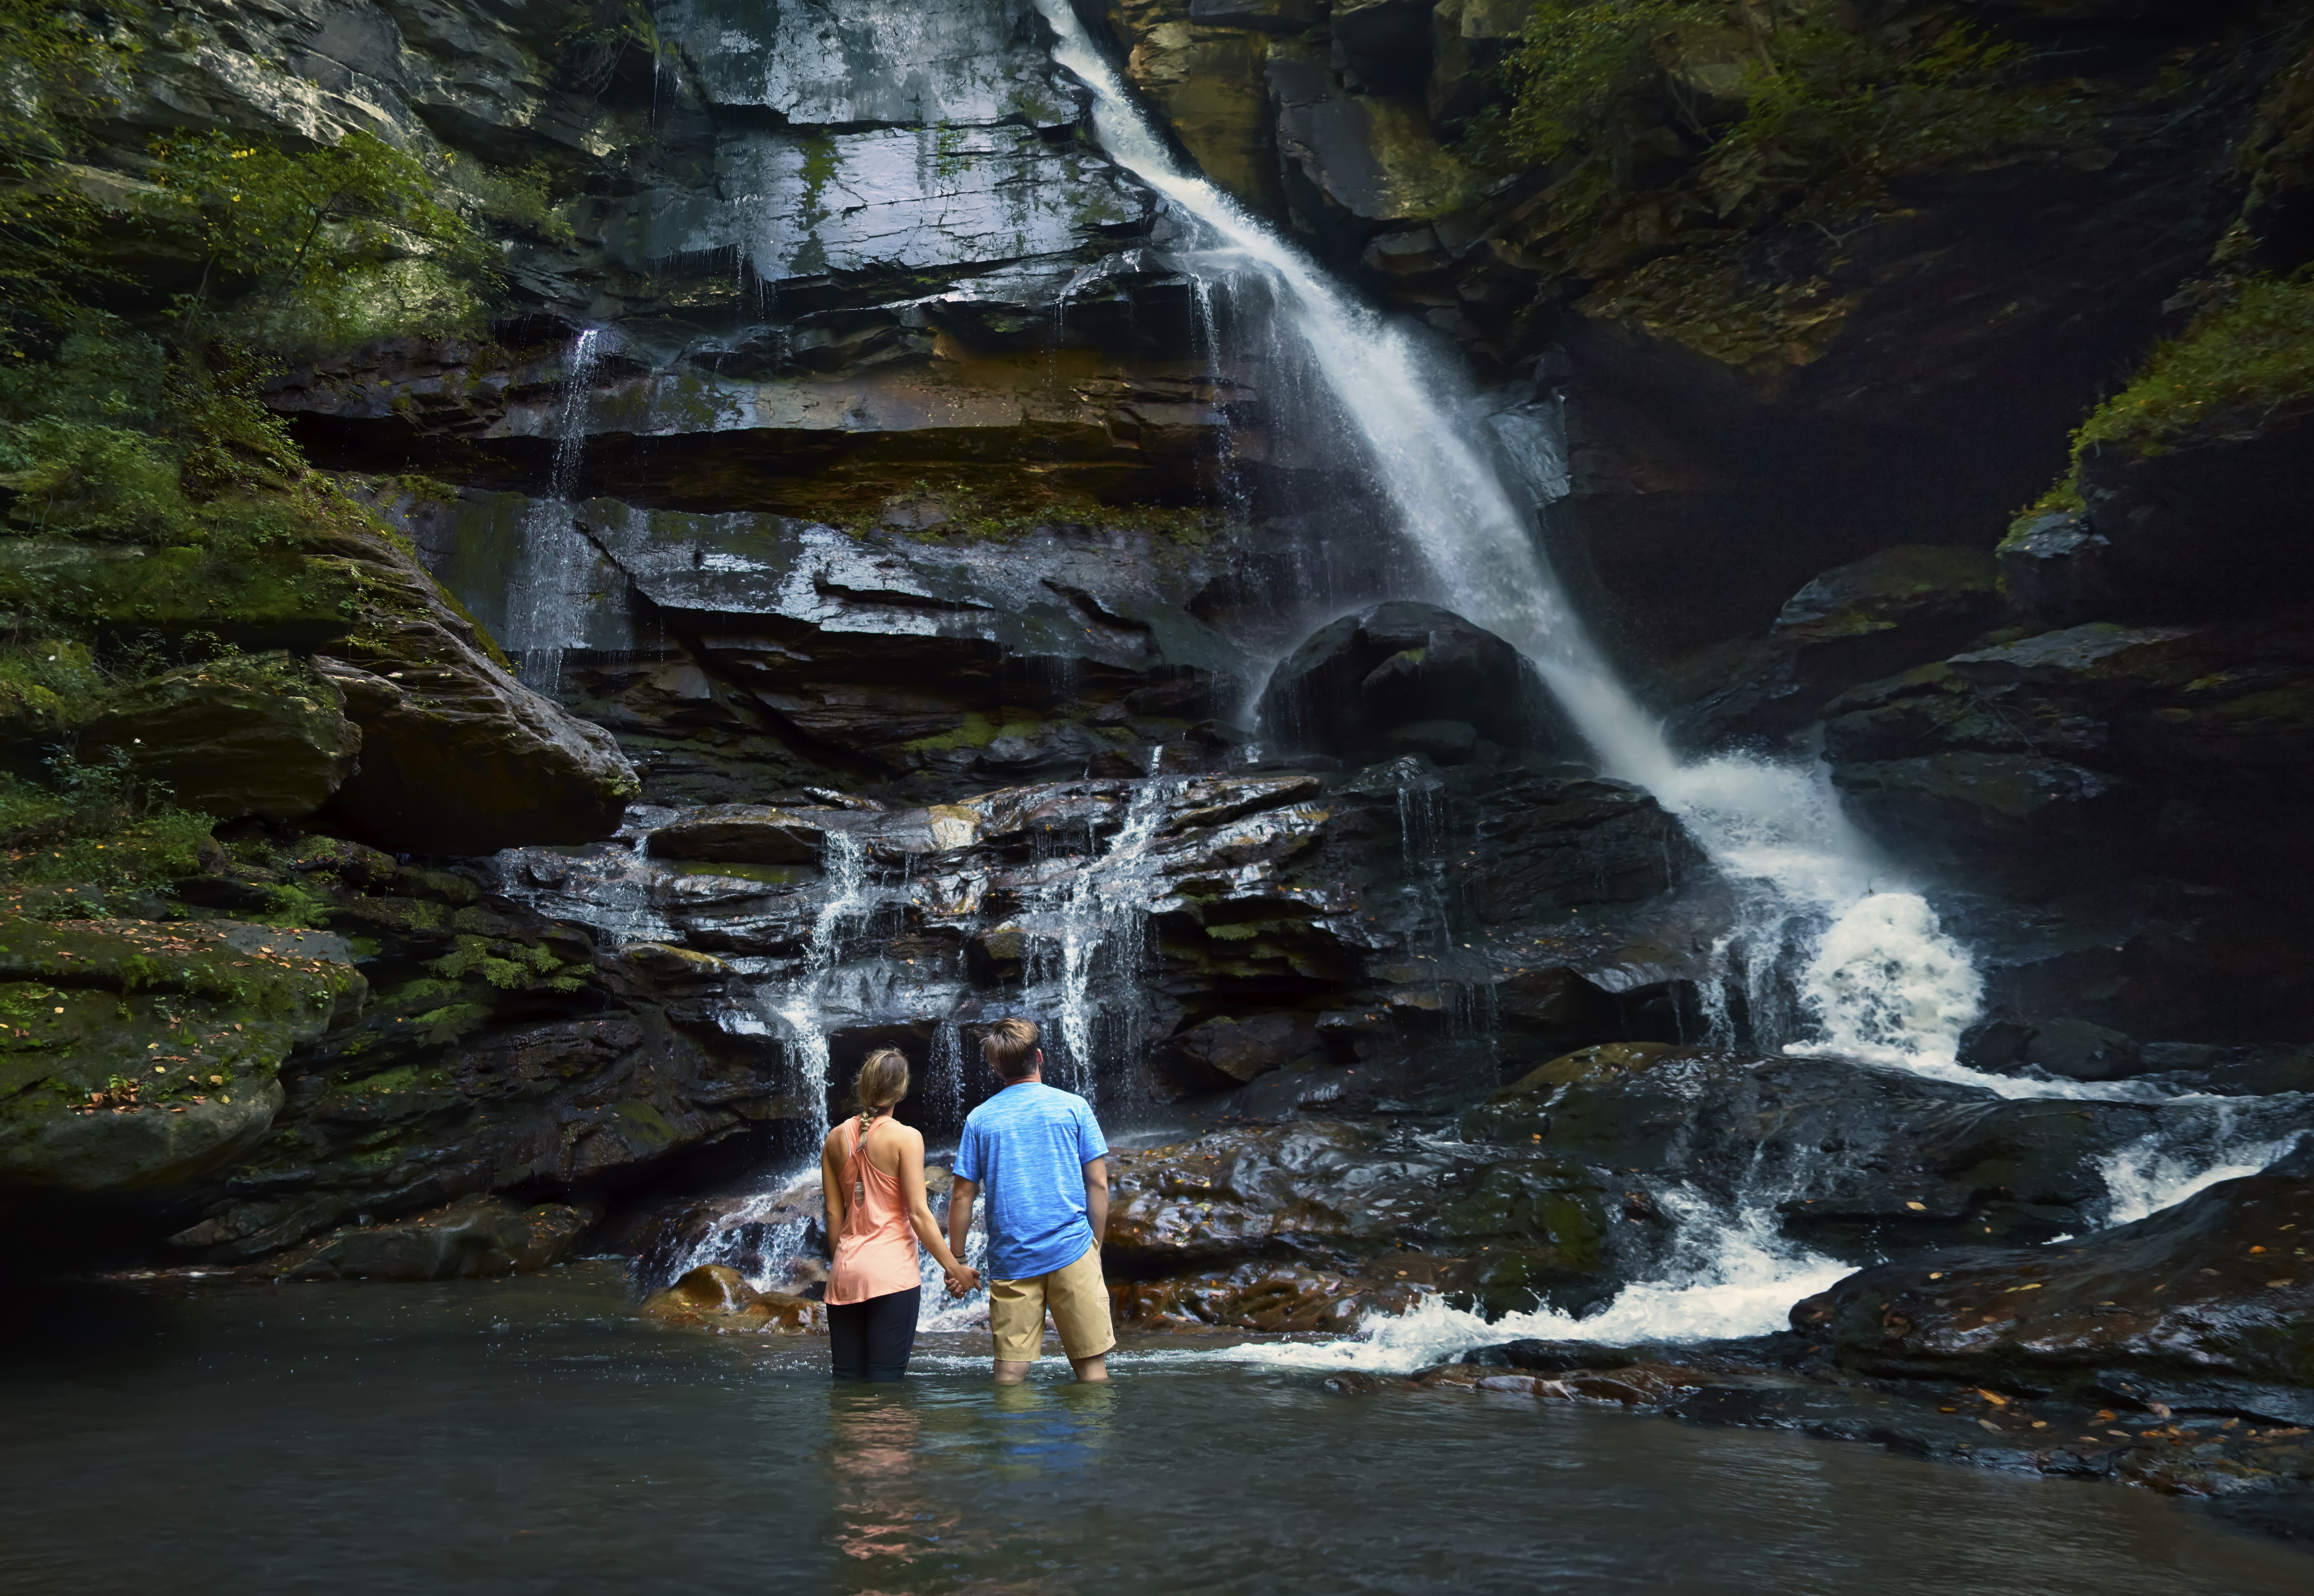 North Carolina Tourism Fuels Record Related Employment and Visitor Spending